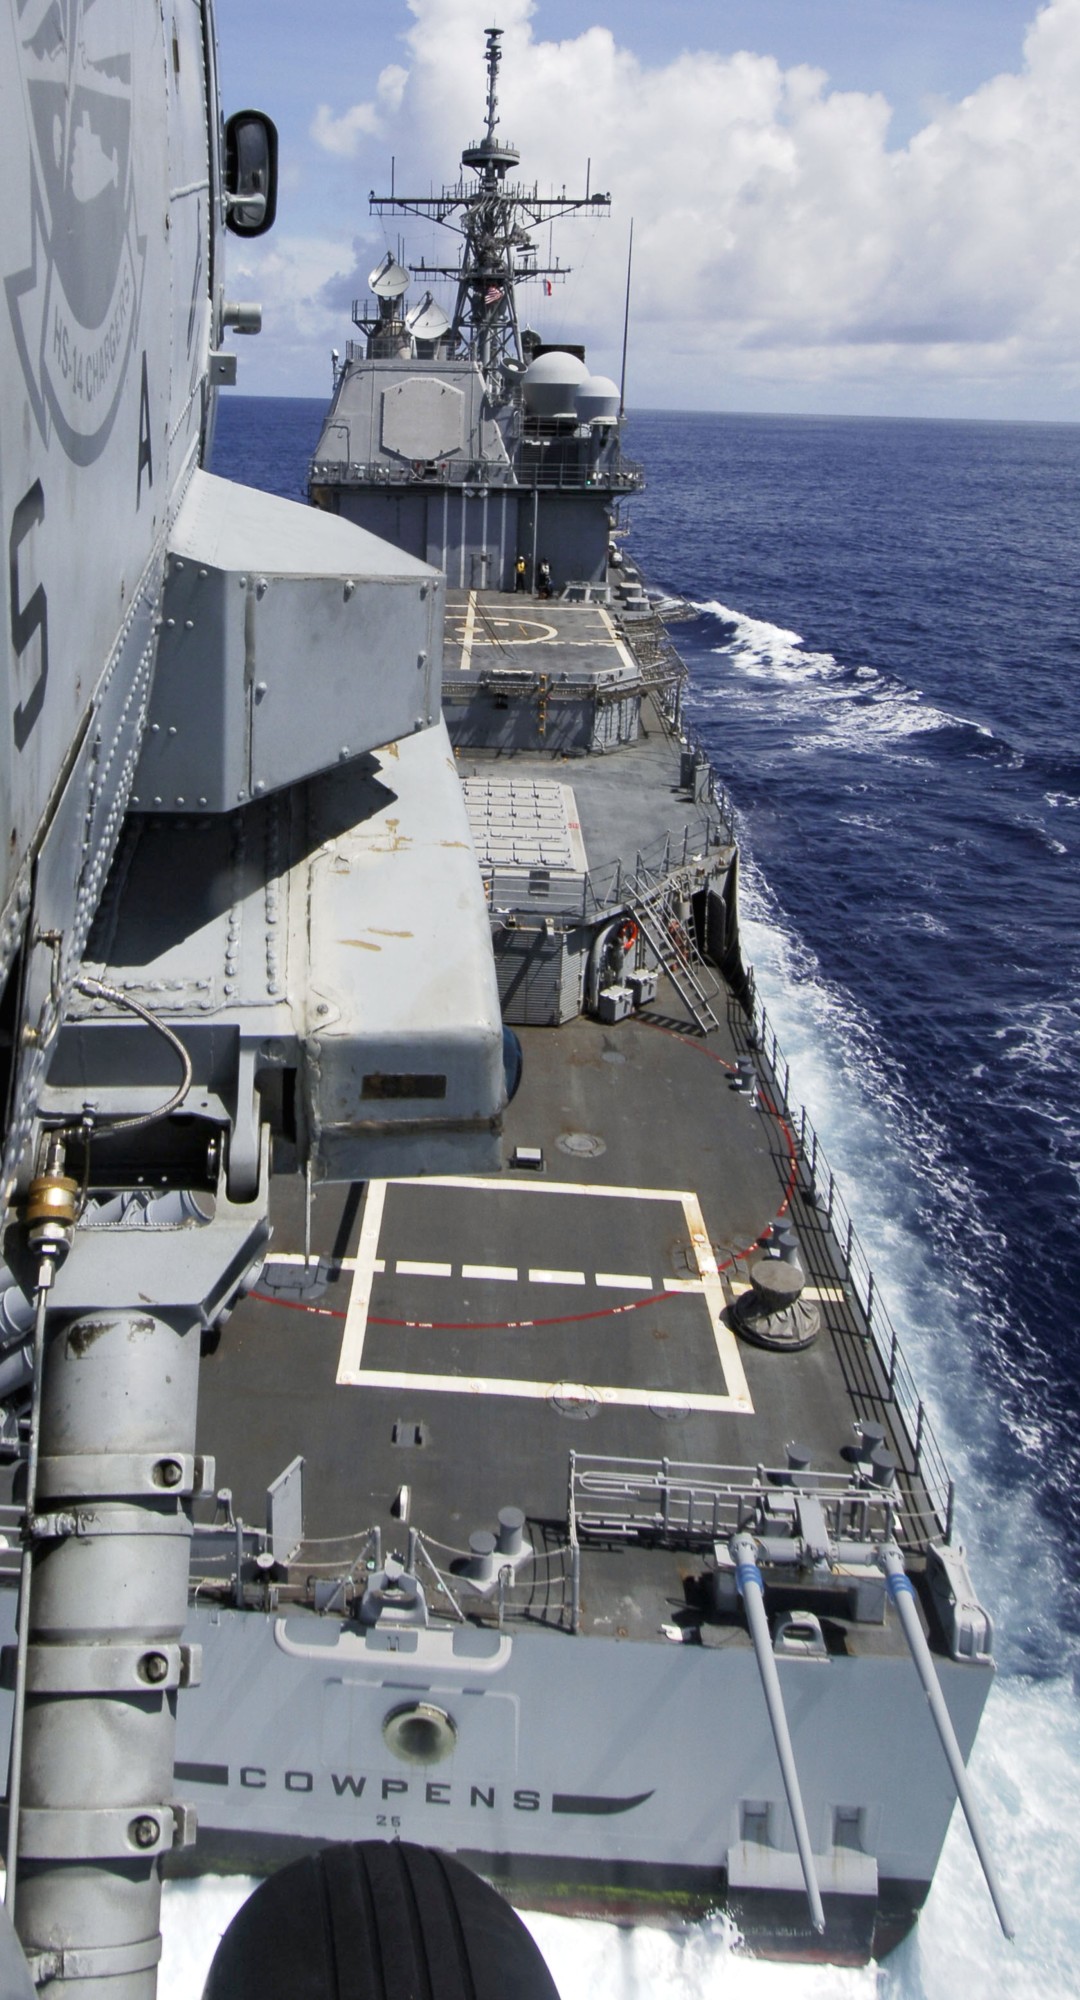 cg-63 uss cowpens ticonderoga class guided missile cruiser aegis us navy seahawk helicopter 23